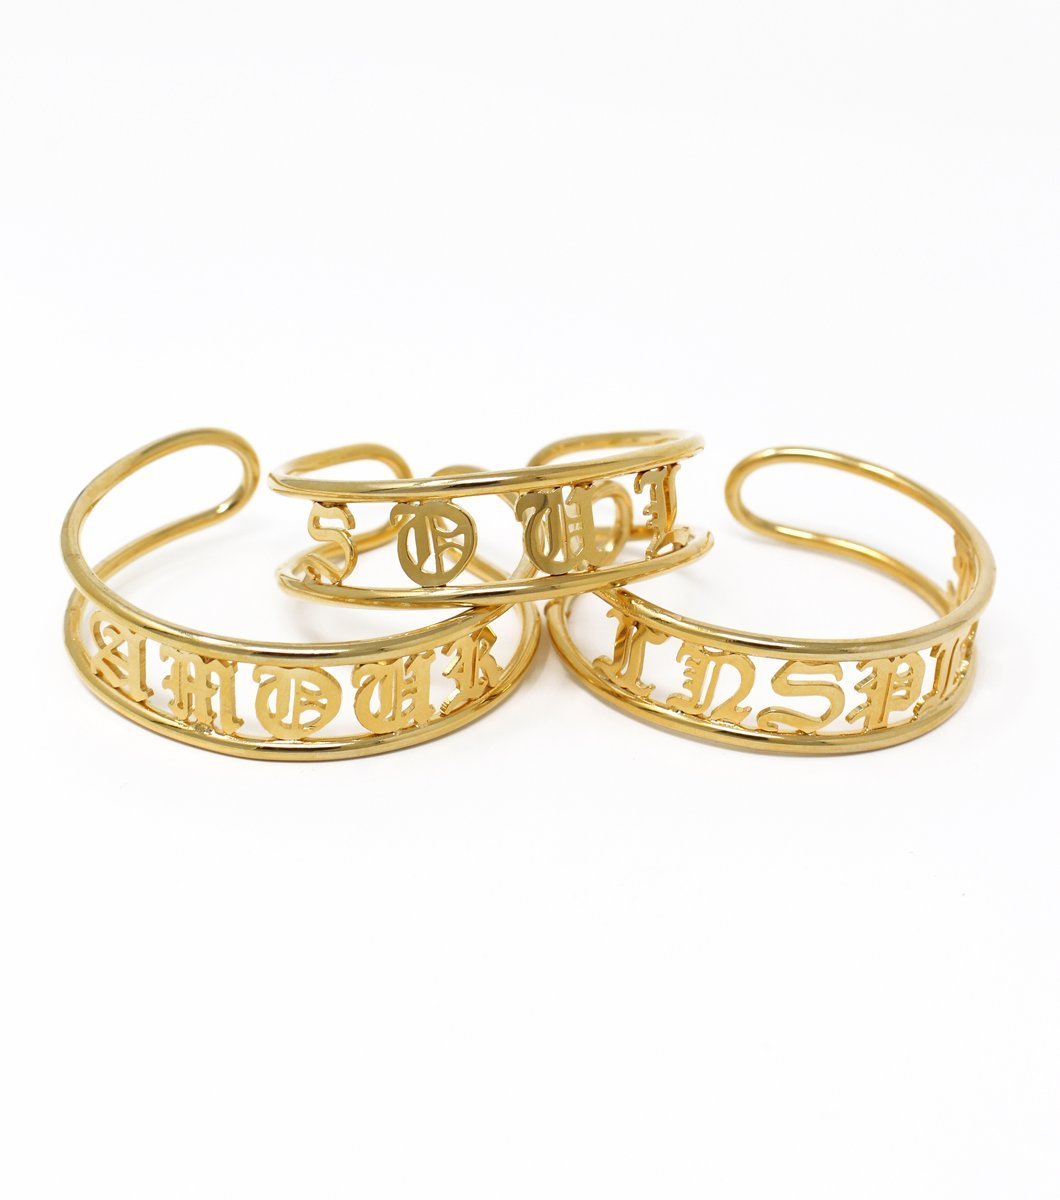 Gothic Letters Bracelet - LAURA CANTU JEWELRY US